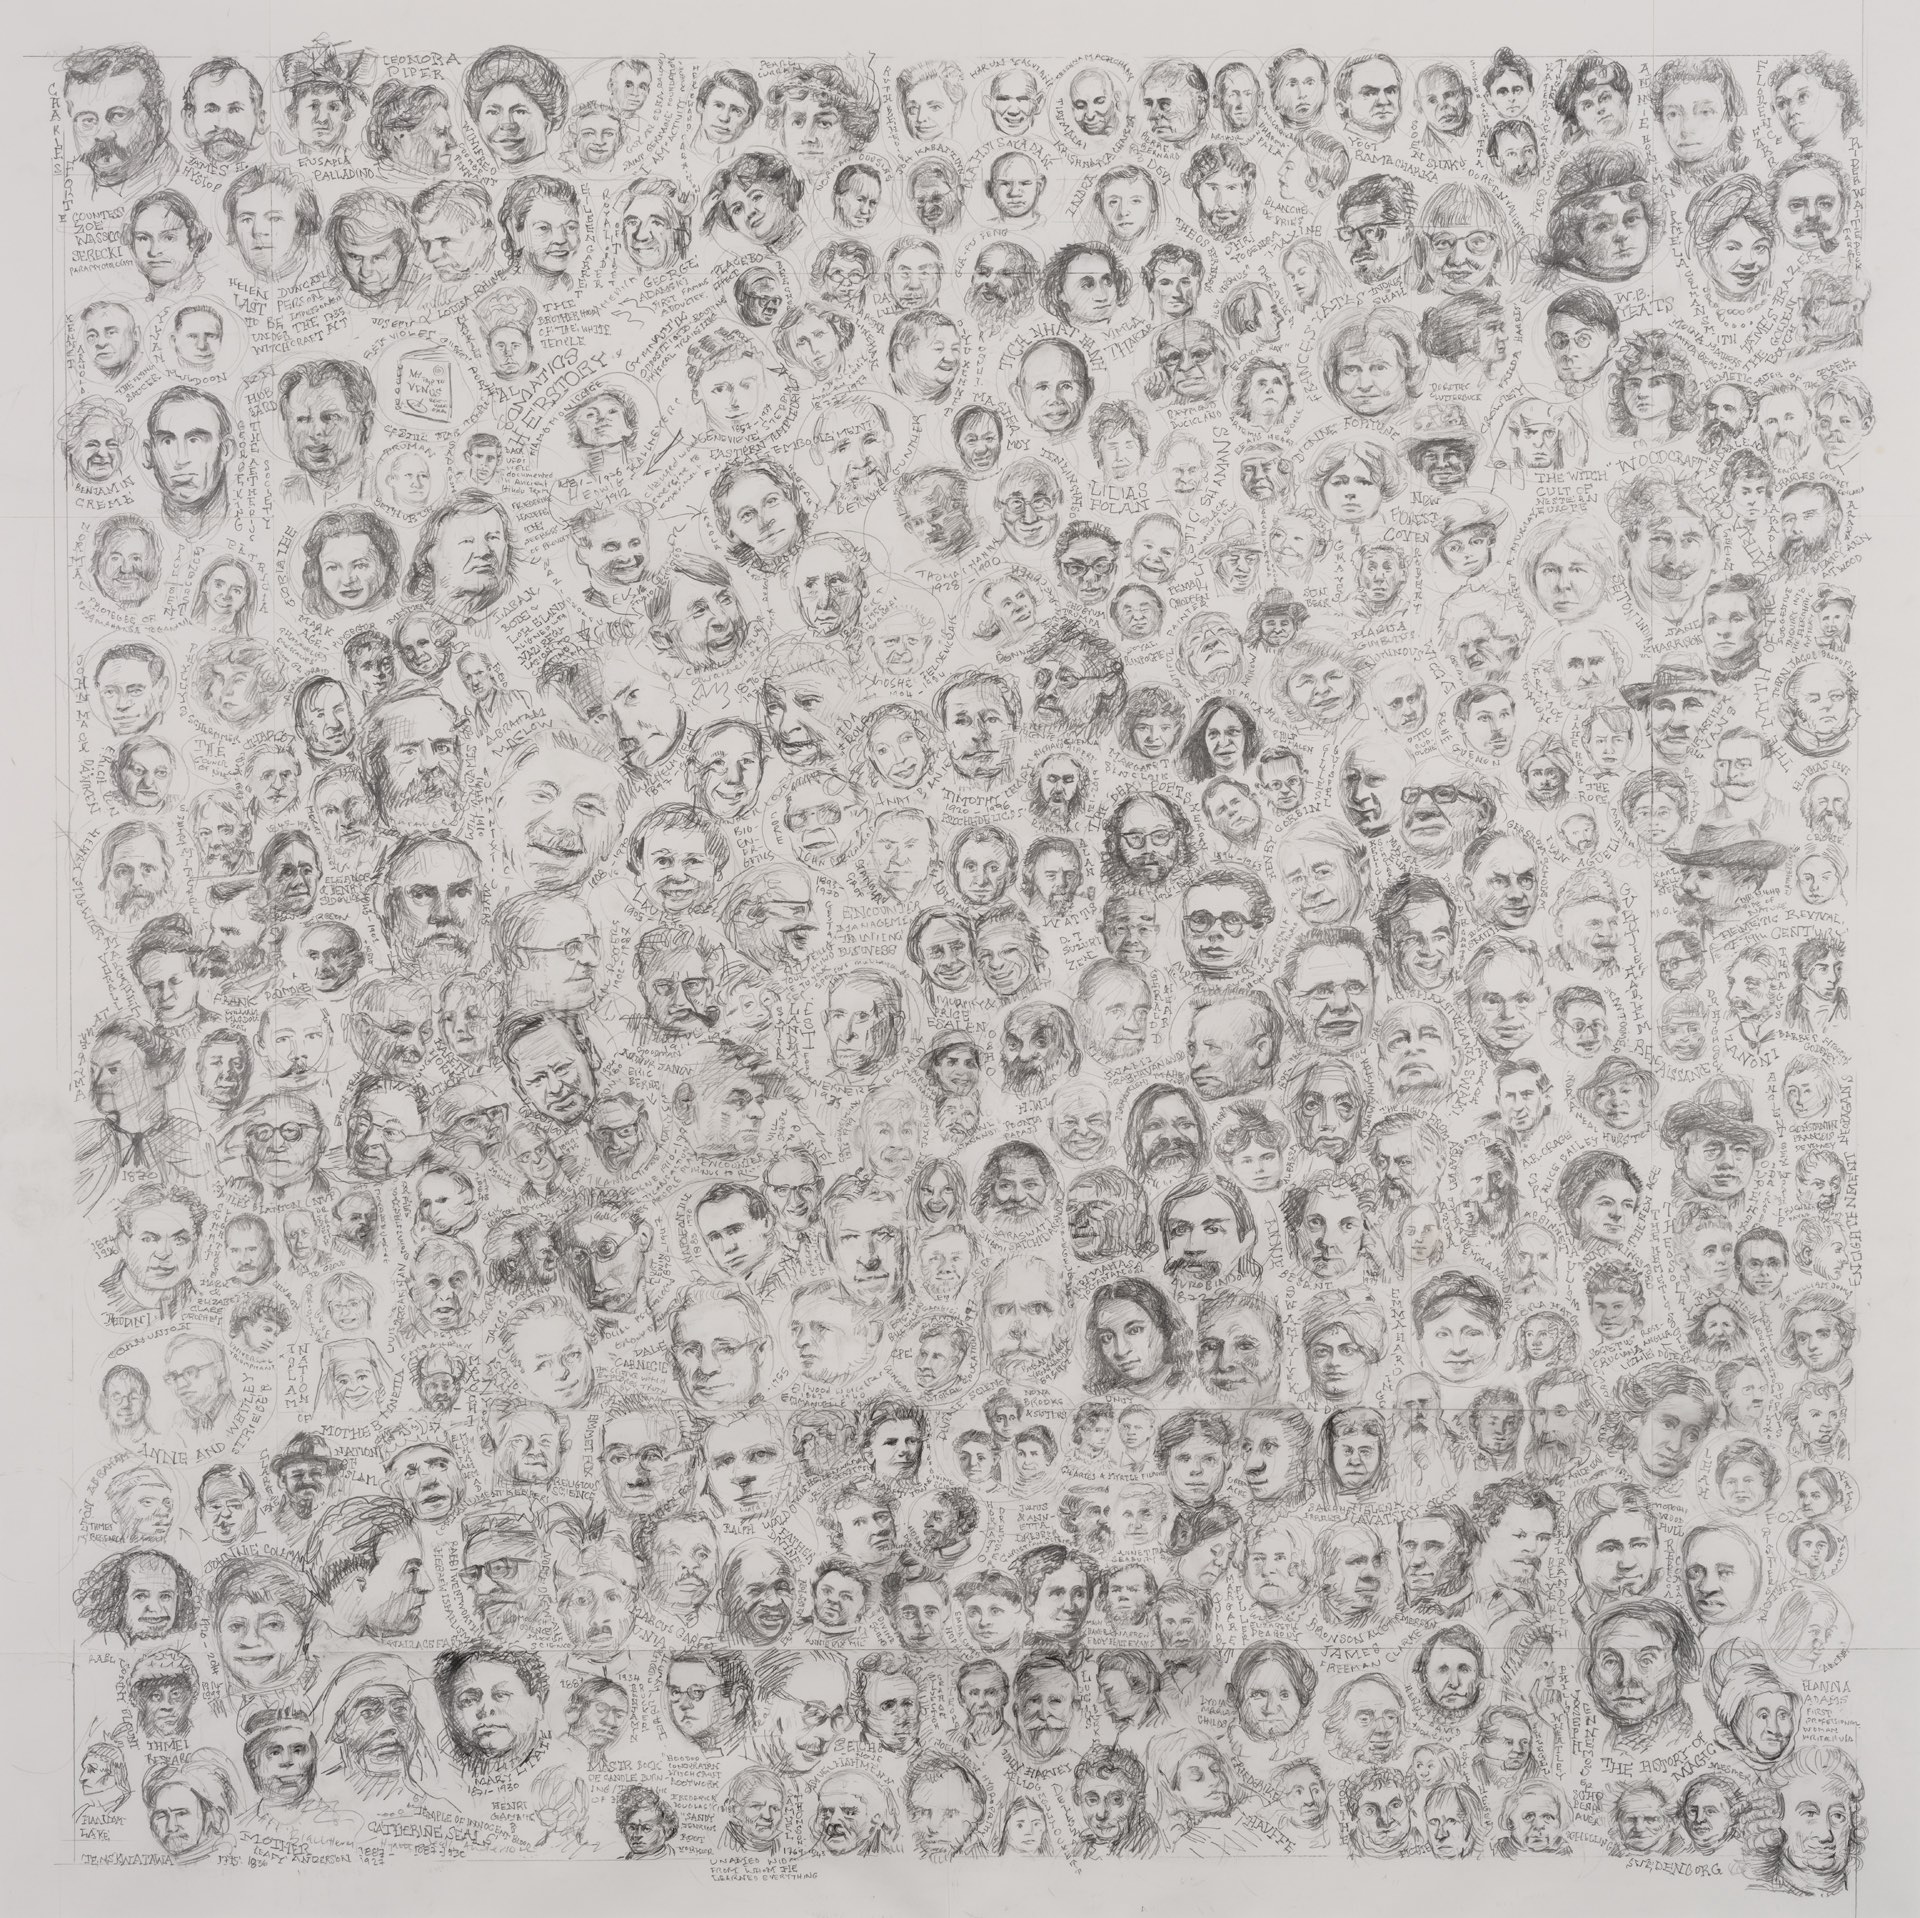 Large pencil drawing consisting of a hundred small portraits, including the names of the people depicted